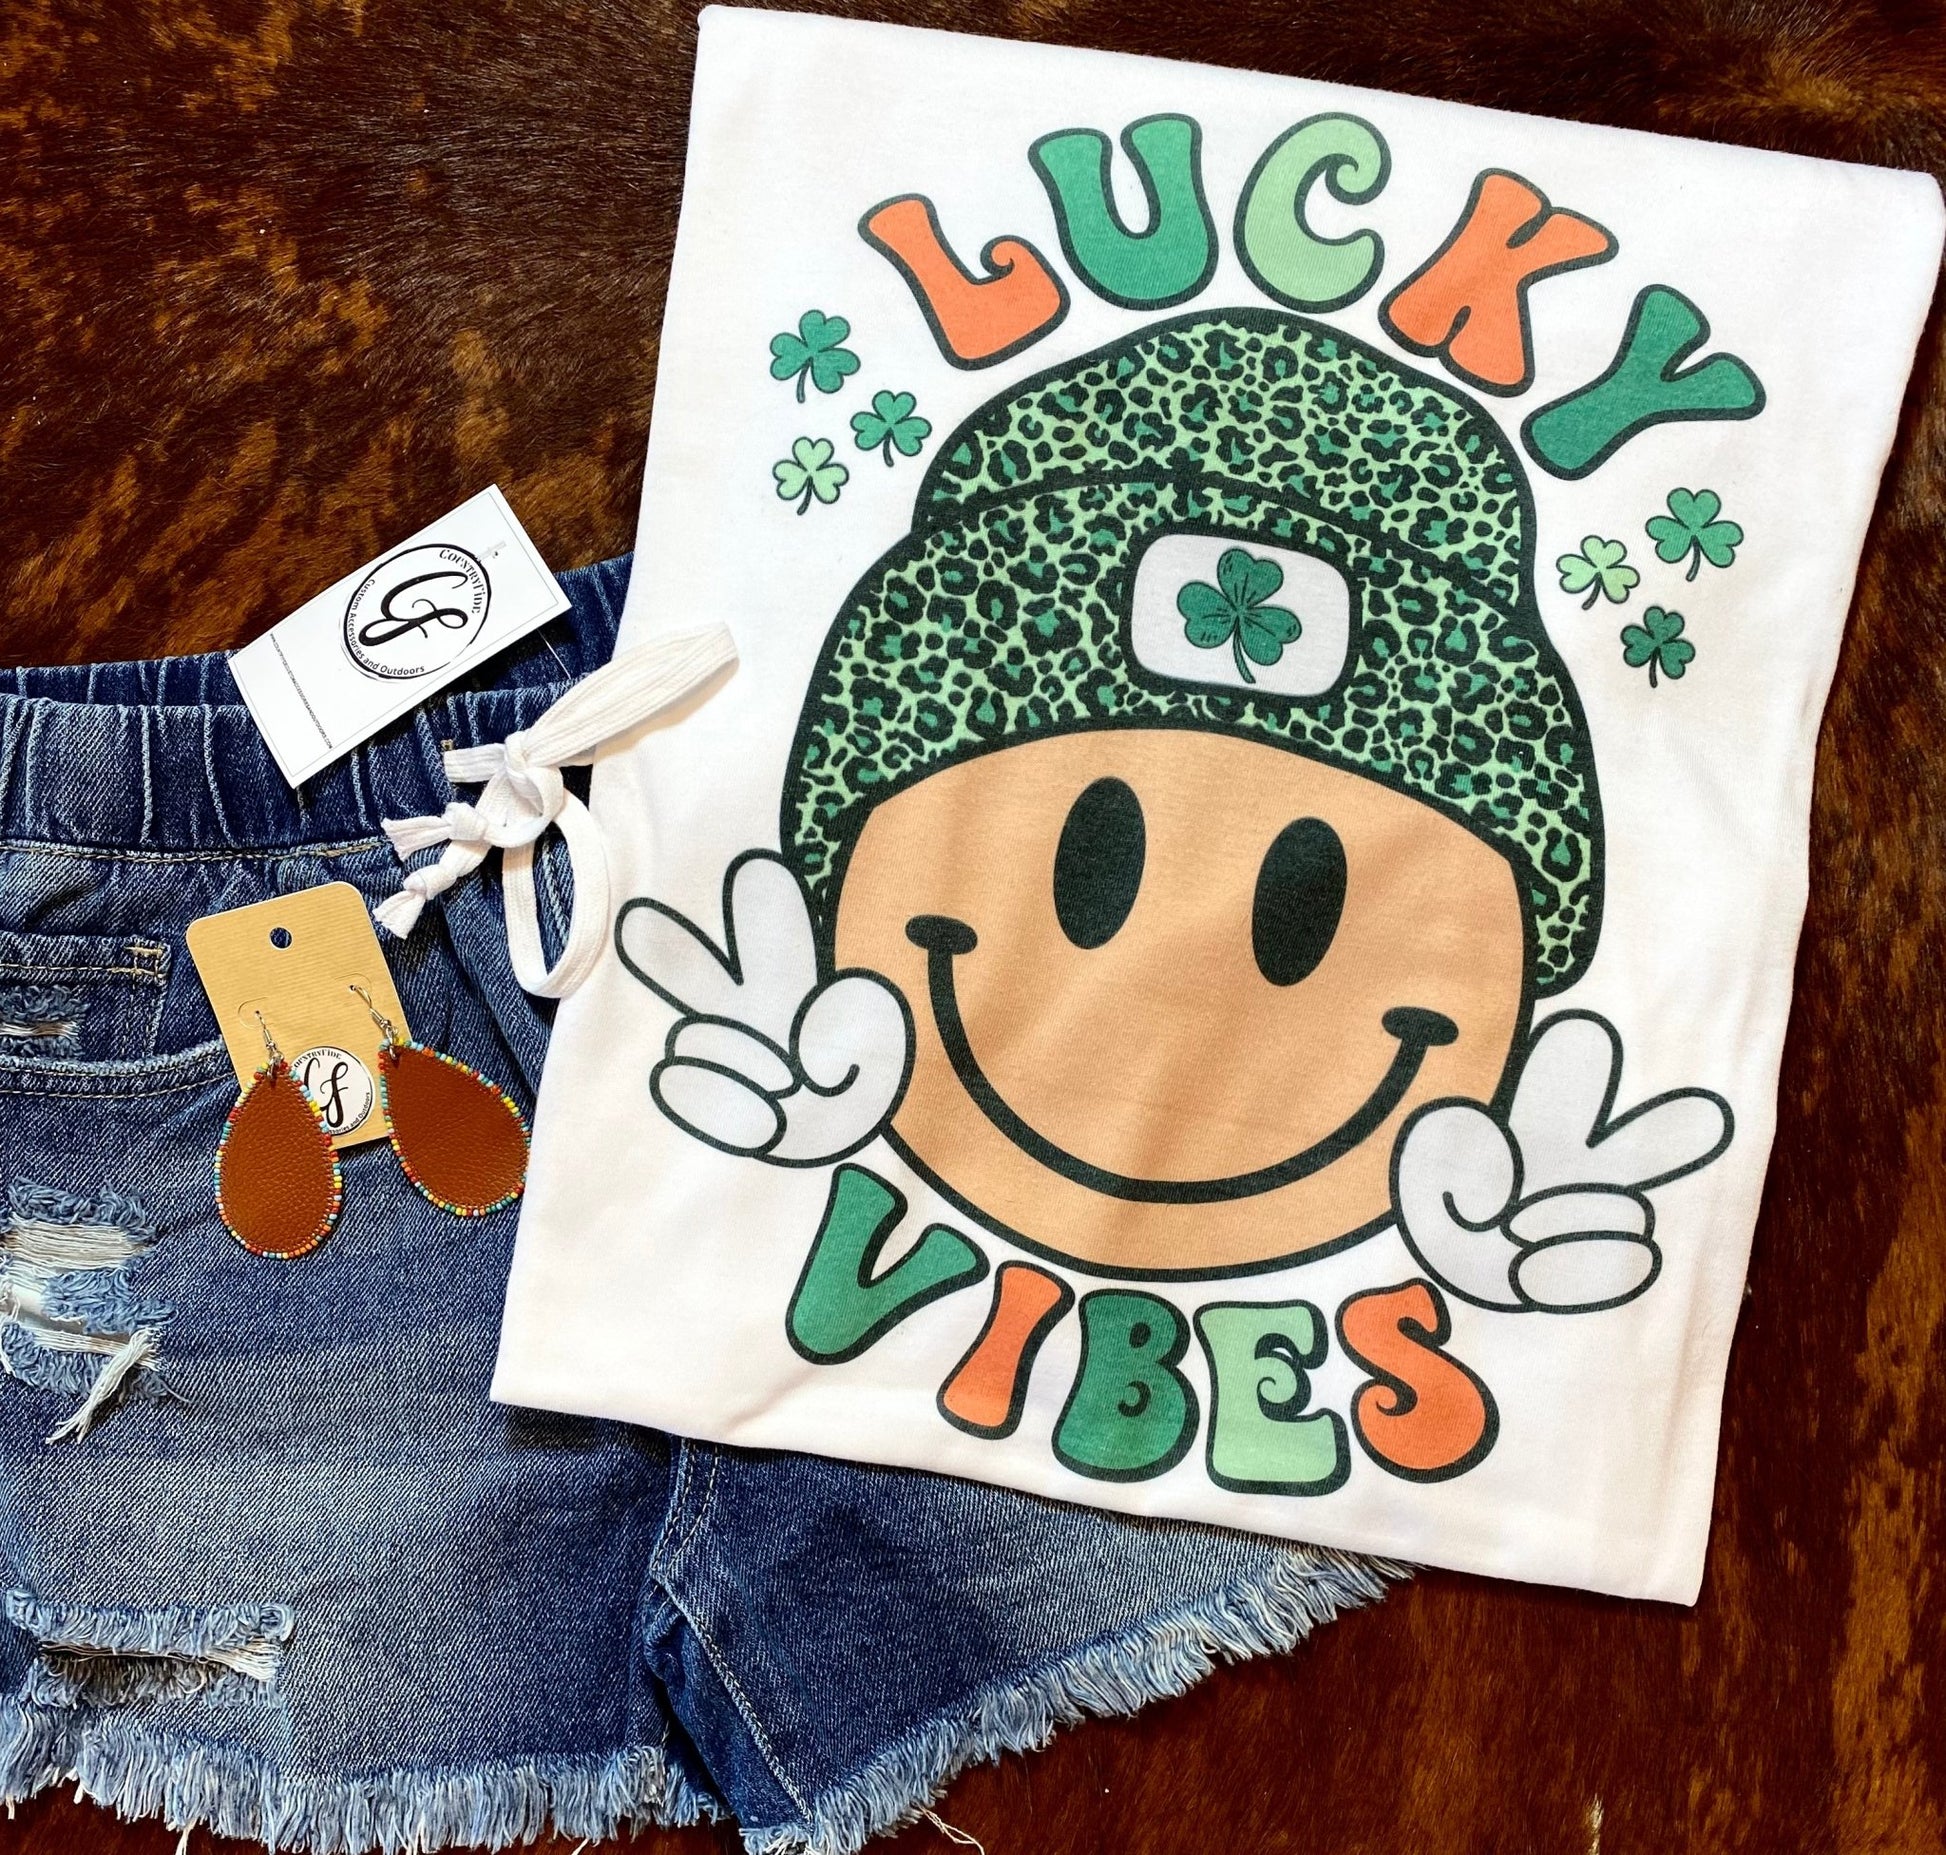 Lucky Vibes - CountryFide Custom Accessories and Outdoors